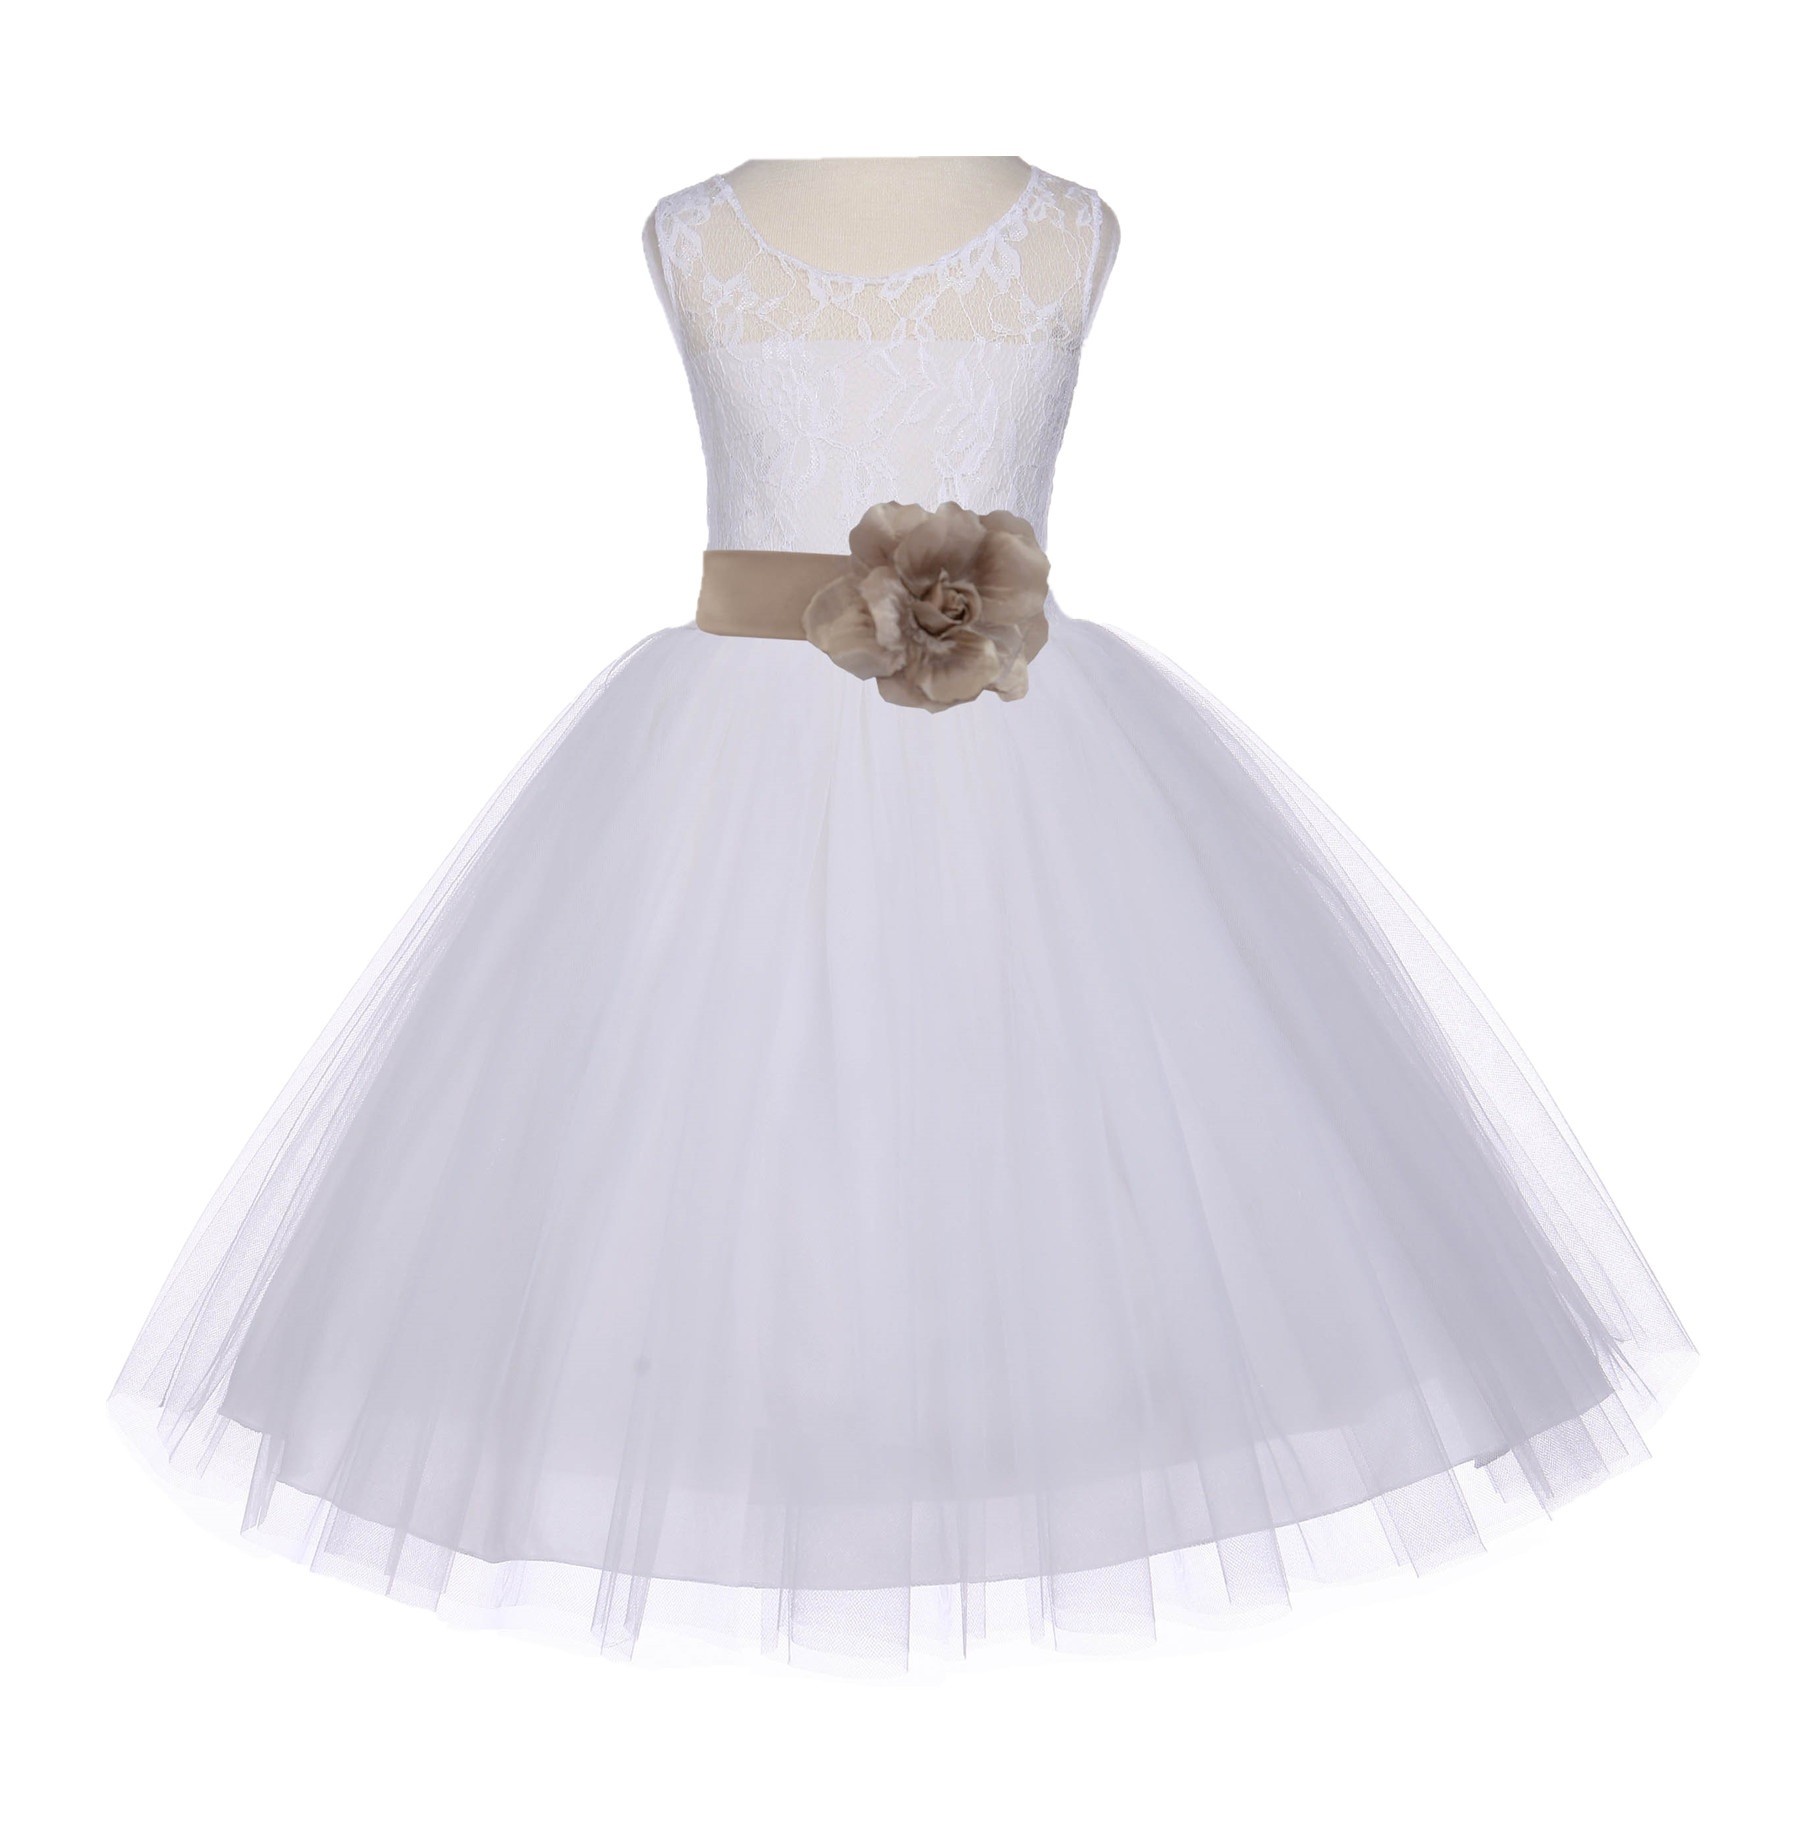 Ivory/Champagne Floral Lace Bodice Tulle Flower Girl Dress Bridesmaid 153S